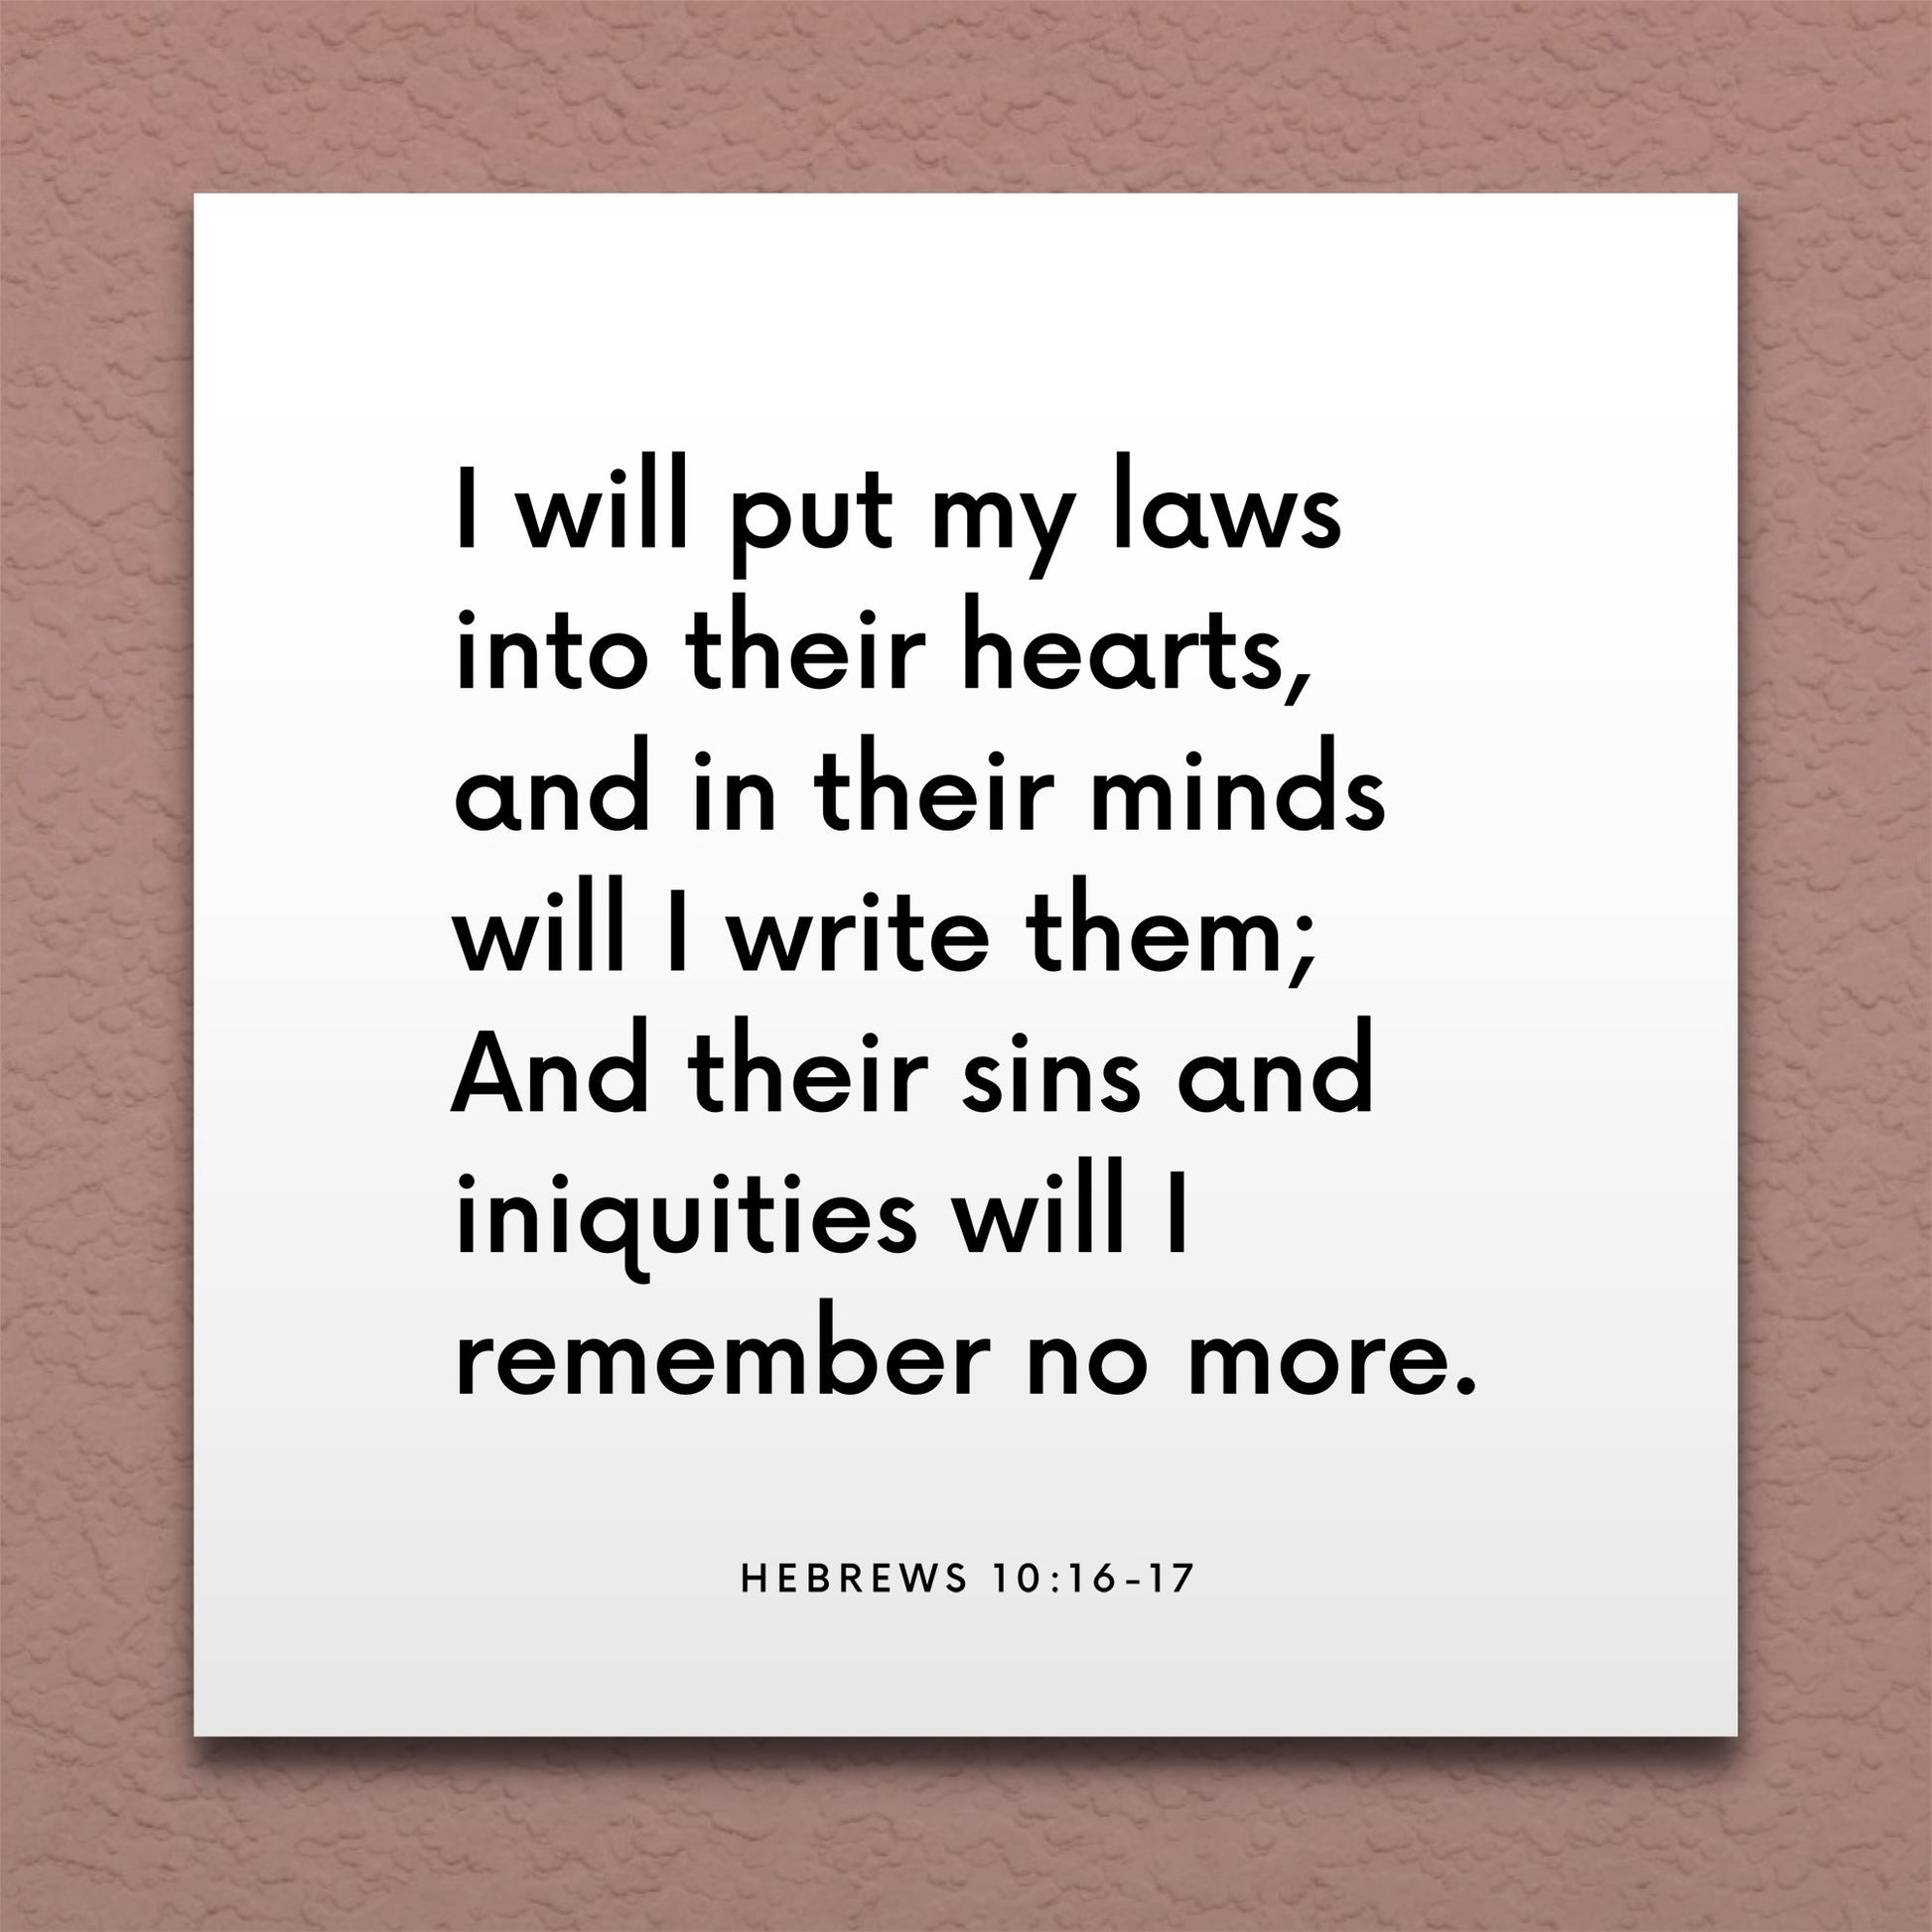 Wall-mounted scripture tile for Hebrews 10:16-17 - "I will put my laws into their hearts, and in their minds"